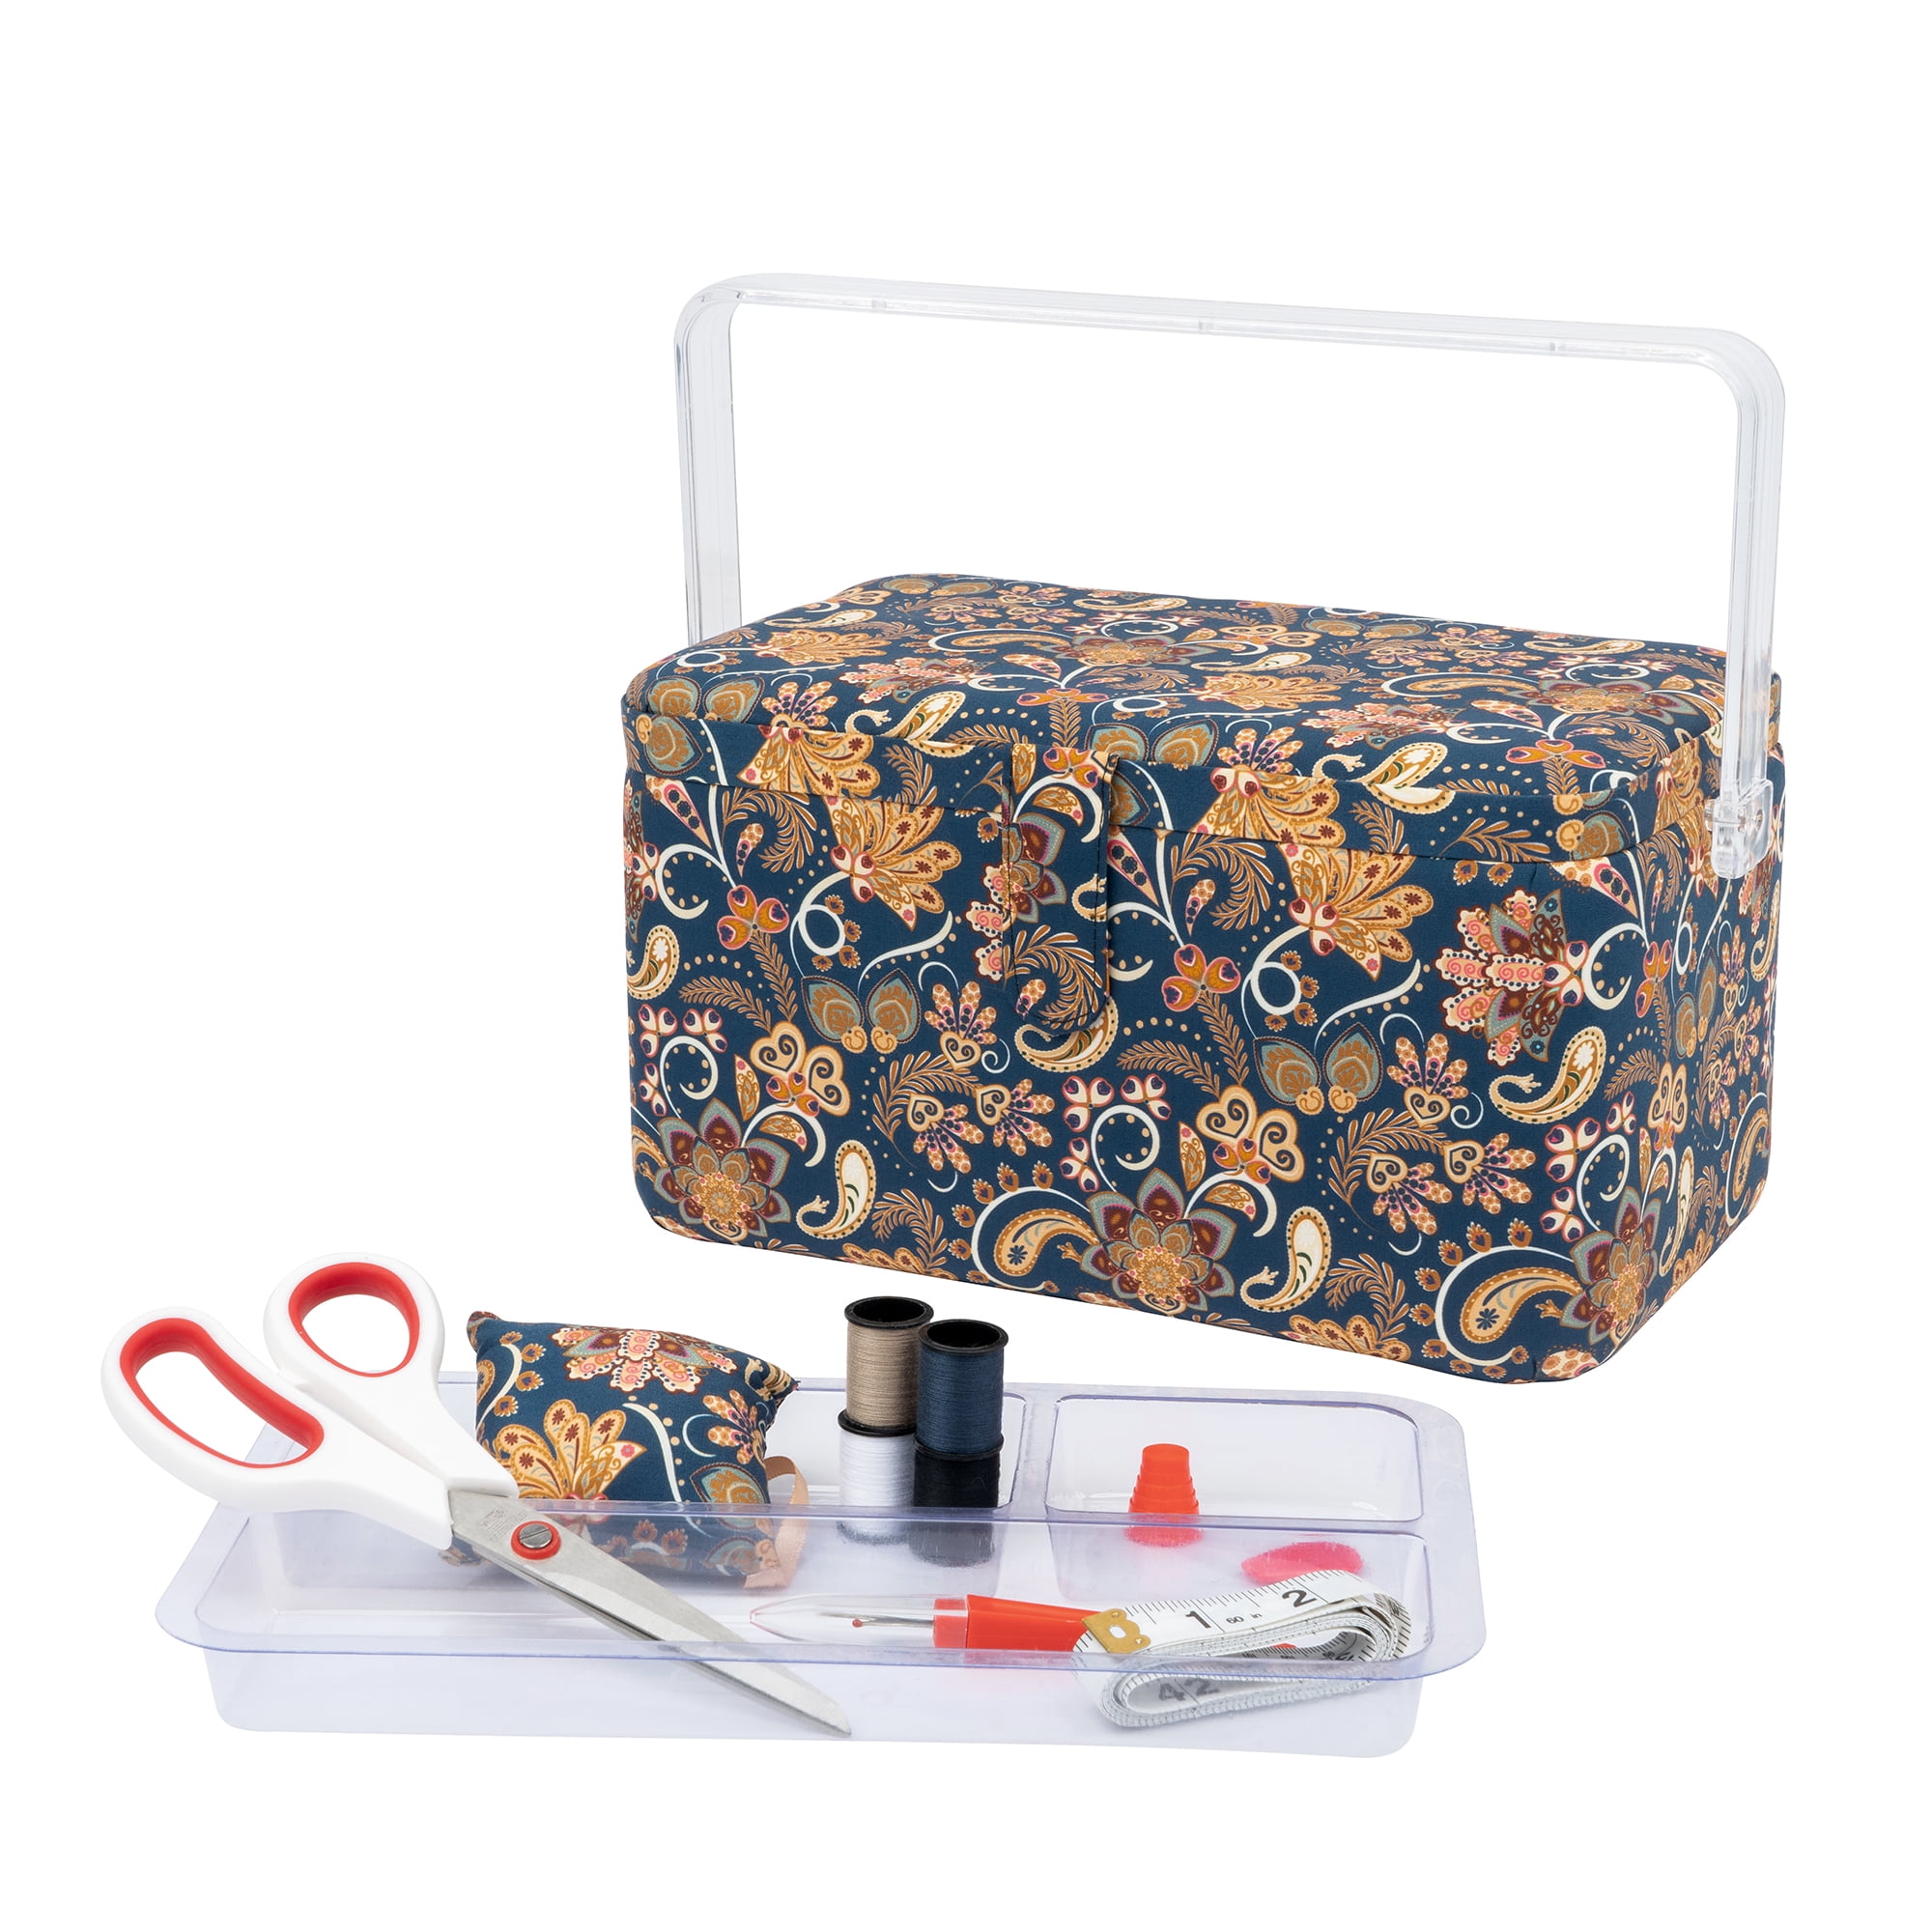 Singer Sewing Basket with Sewing Kit, Needles, Thread, Scissors, and Notions- White